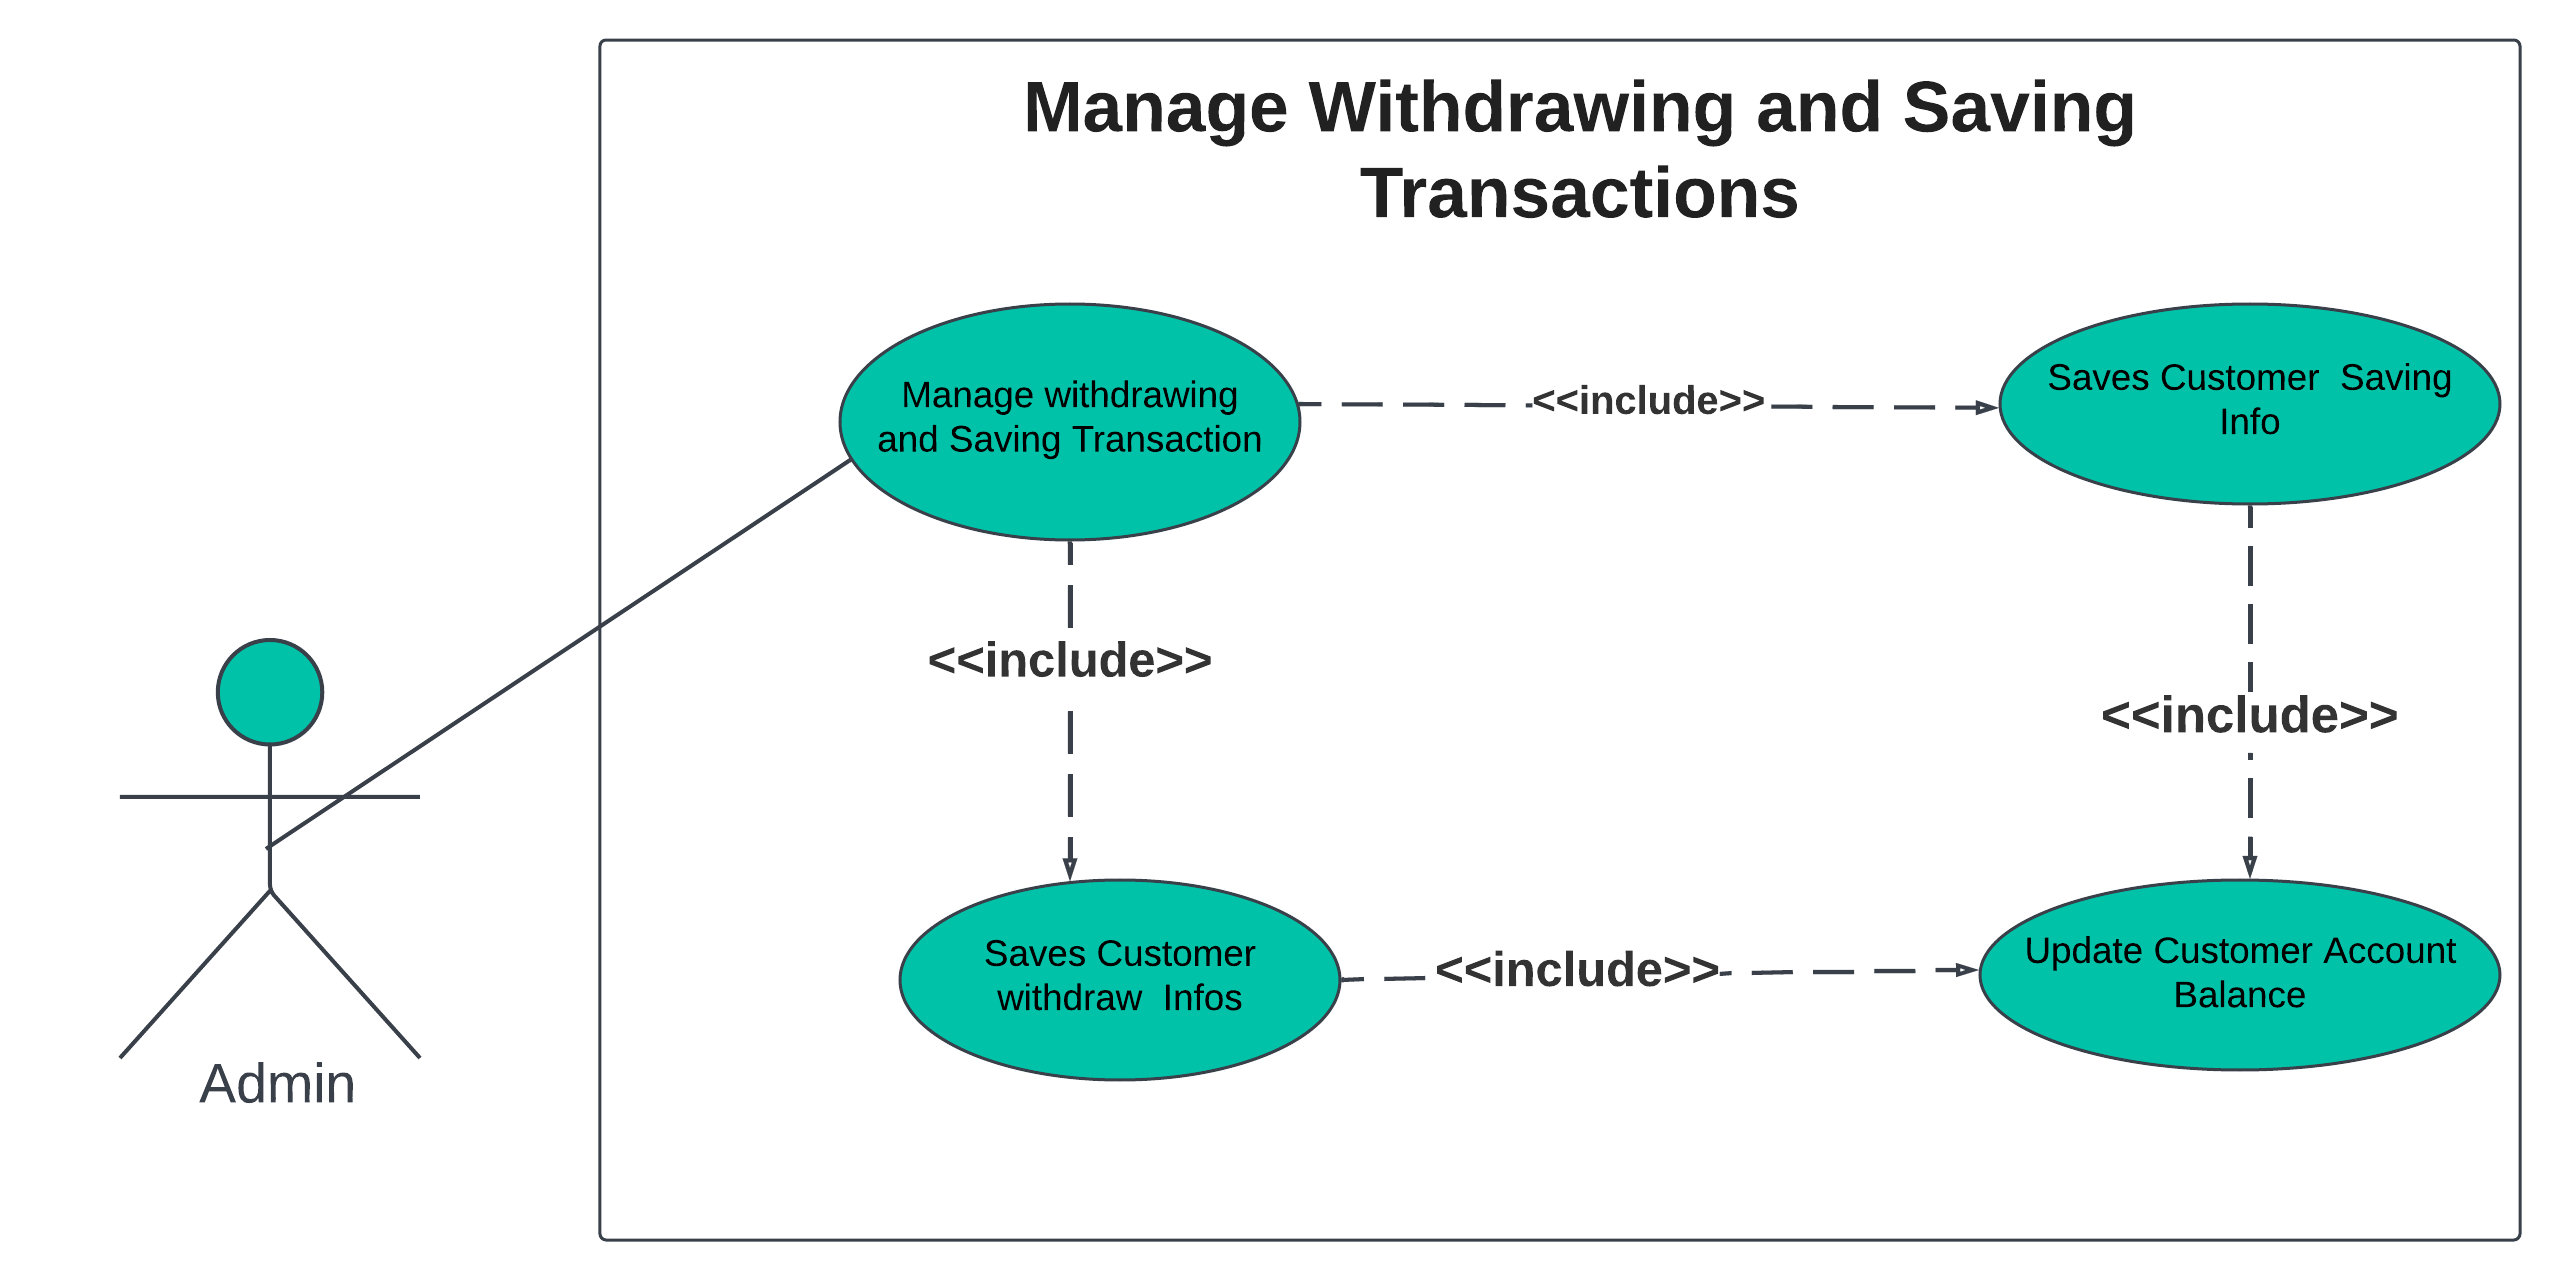 MANAGE WITHDRAWING AND SAVING USE CASE DIAGRAM